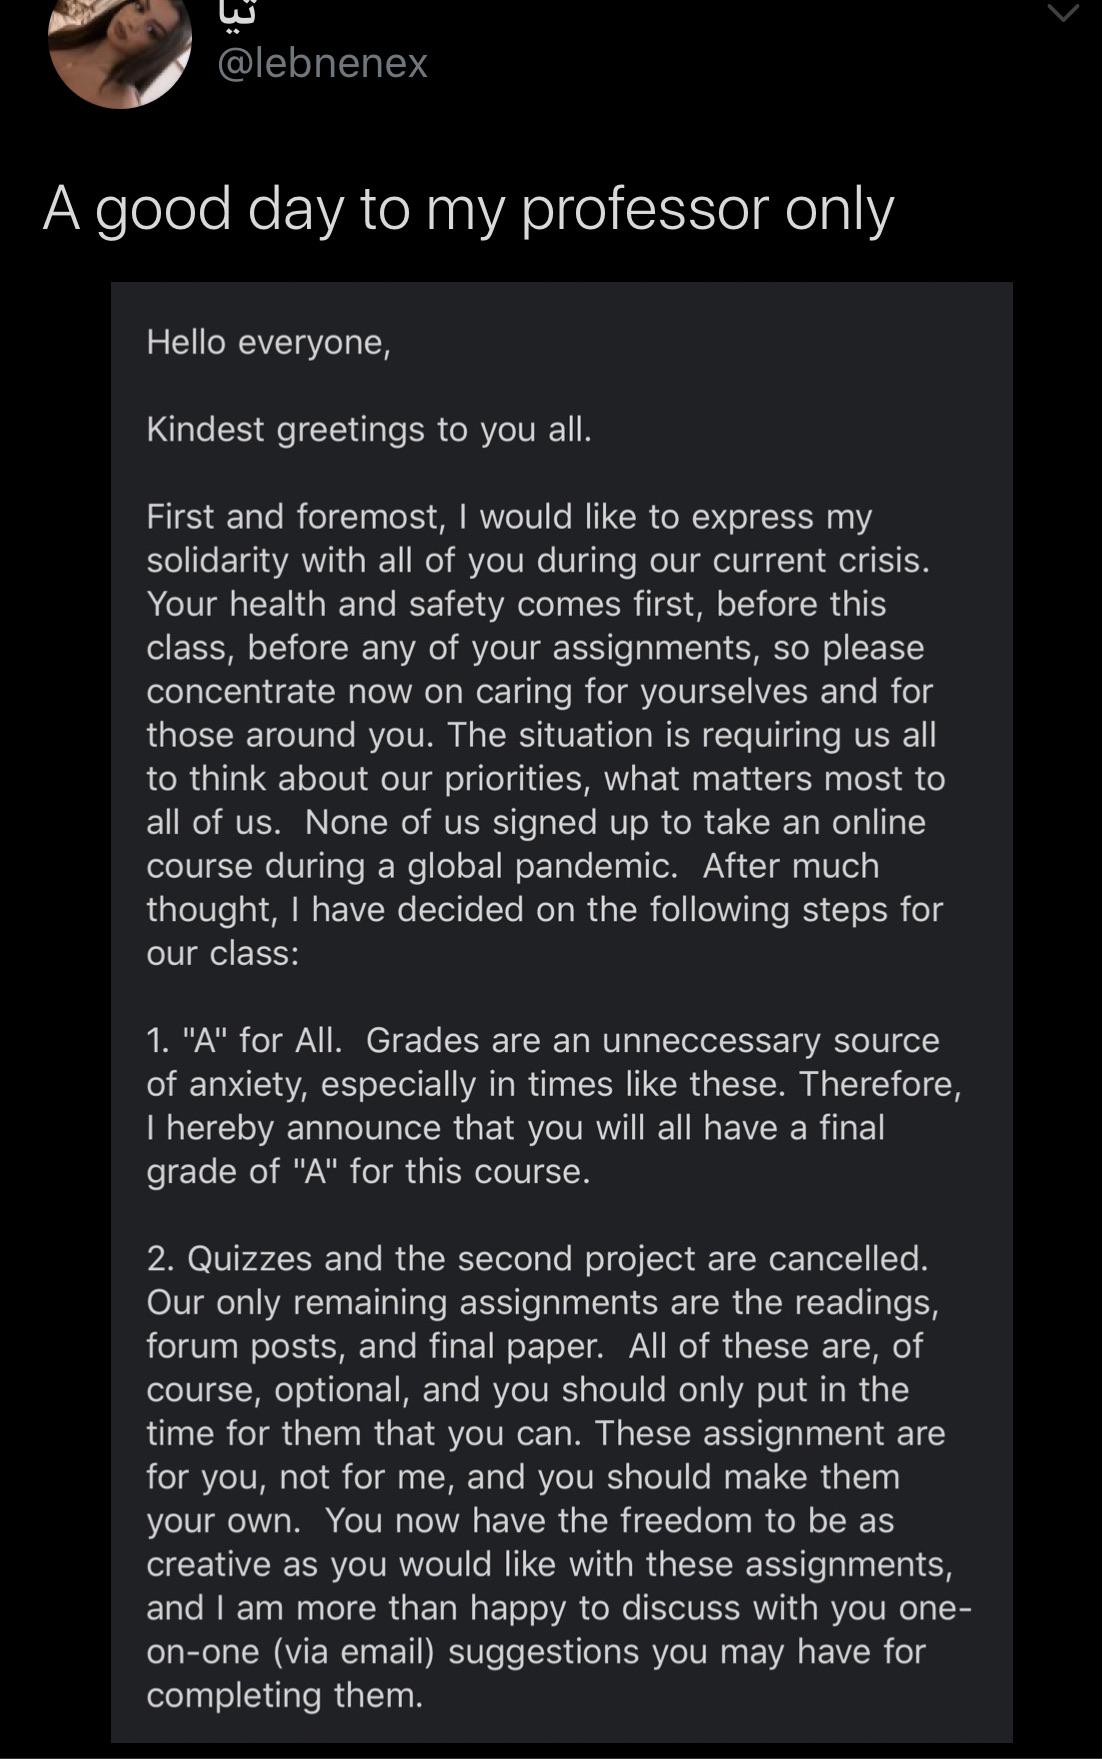 screenshot - A good day to my professor only Hello everyone, Kindest greetings to you all. First and foremost, I would to express my solidarity with all of you during our current crisis. Your health and safety comes first, before this class, before any of